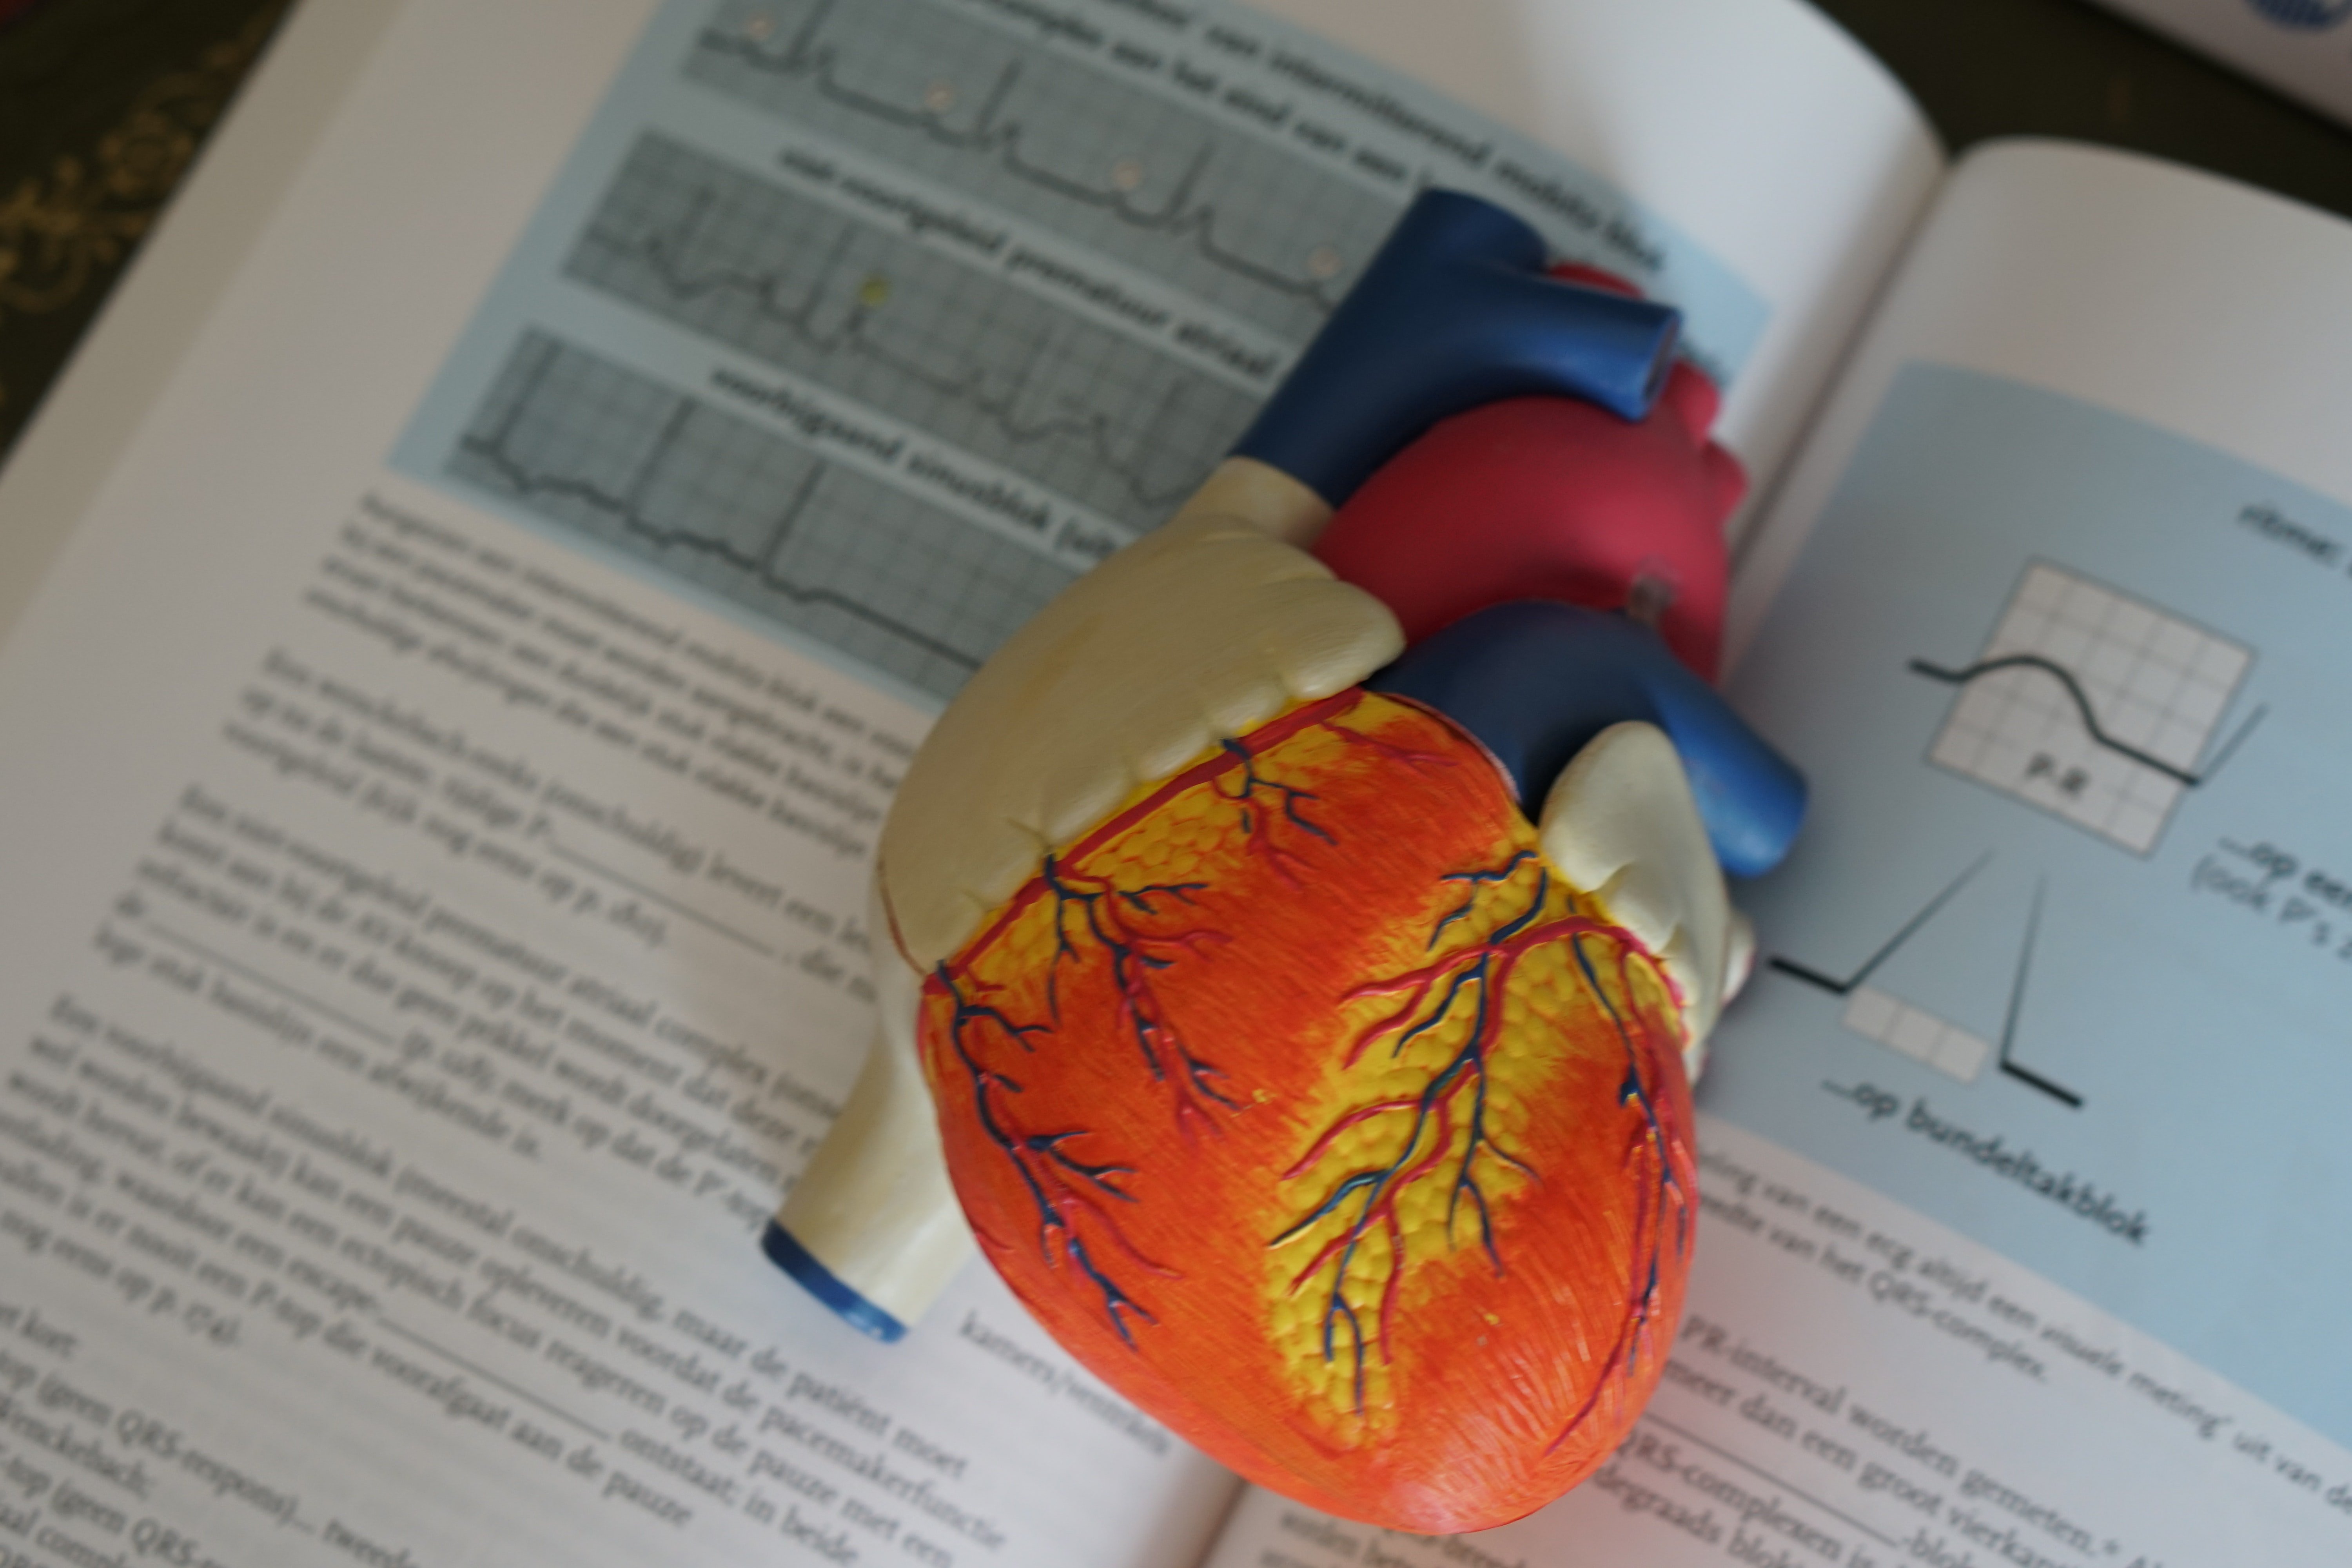 Image of heart model on textbook